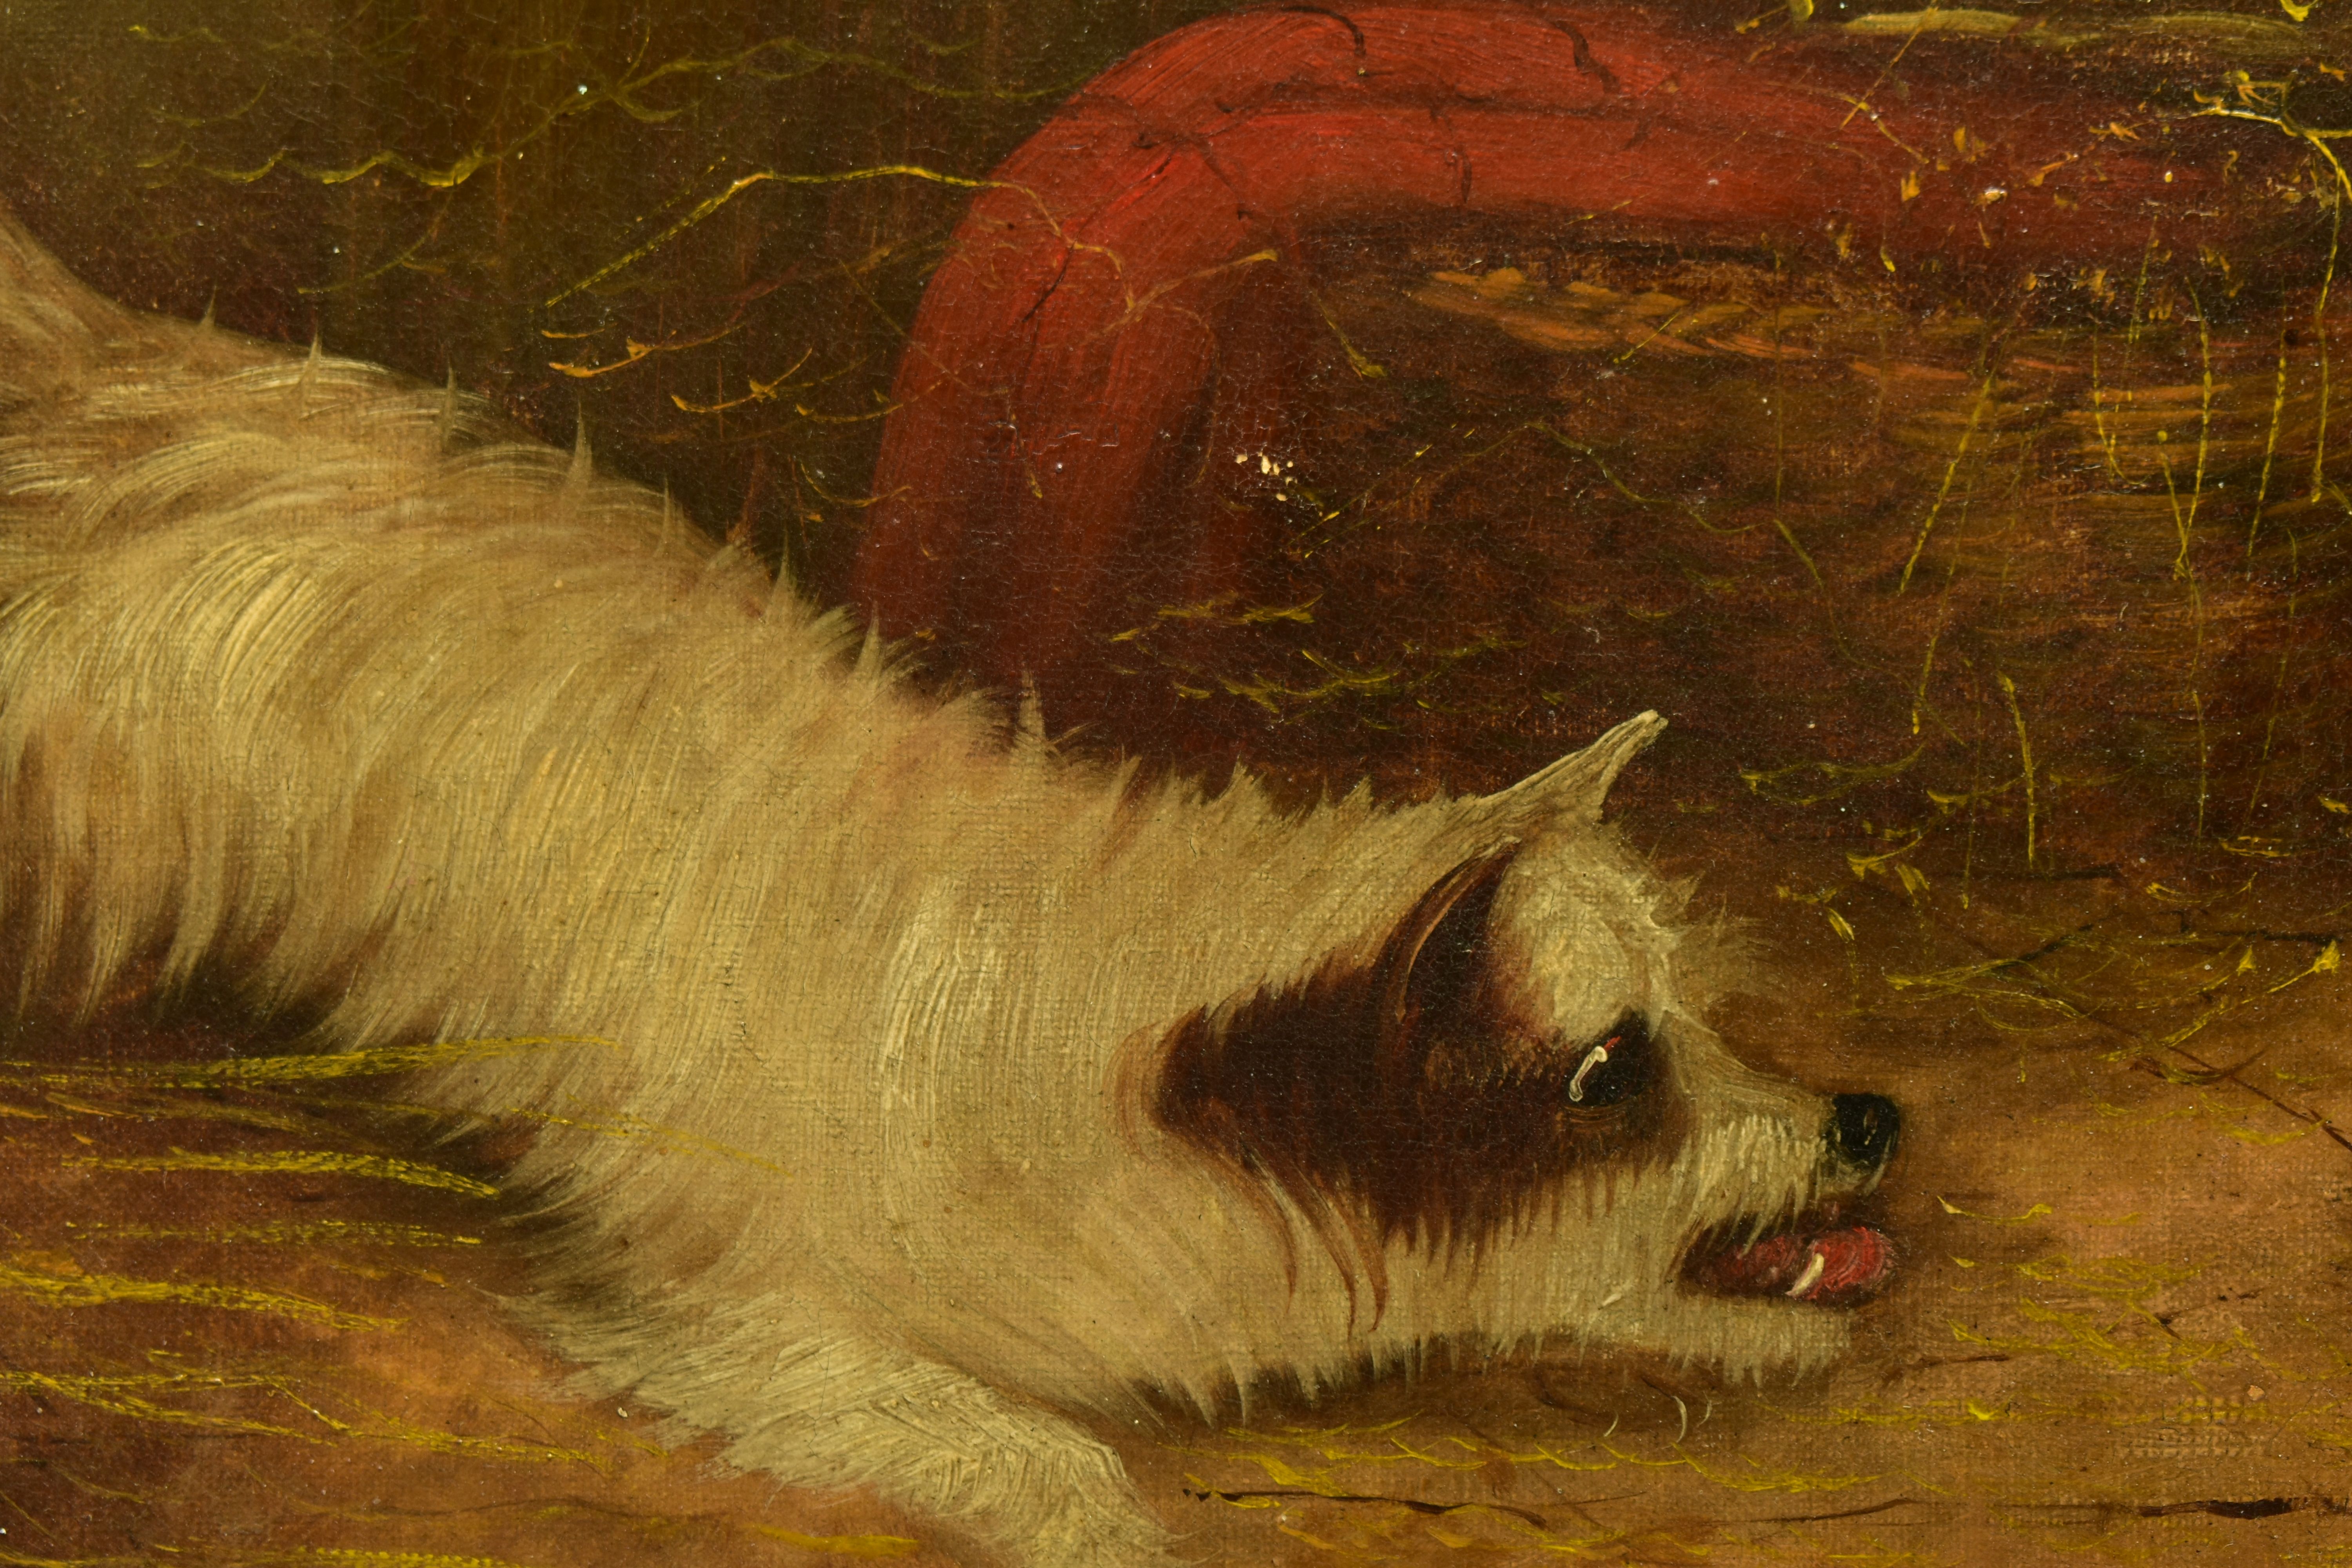 G. GREGORY (19THCENTURY) A TERRIER CHASING A RAT, a depiction of a terrier in a barn chasing a rat - Image 3 of 6